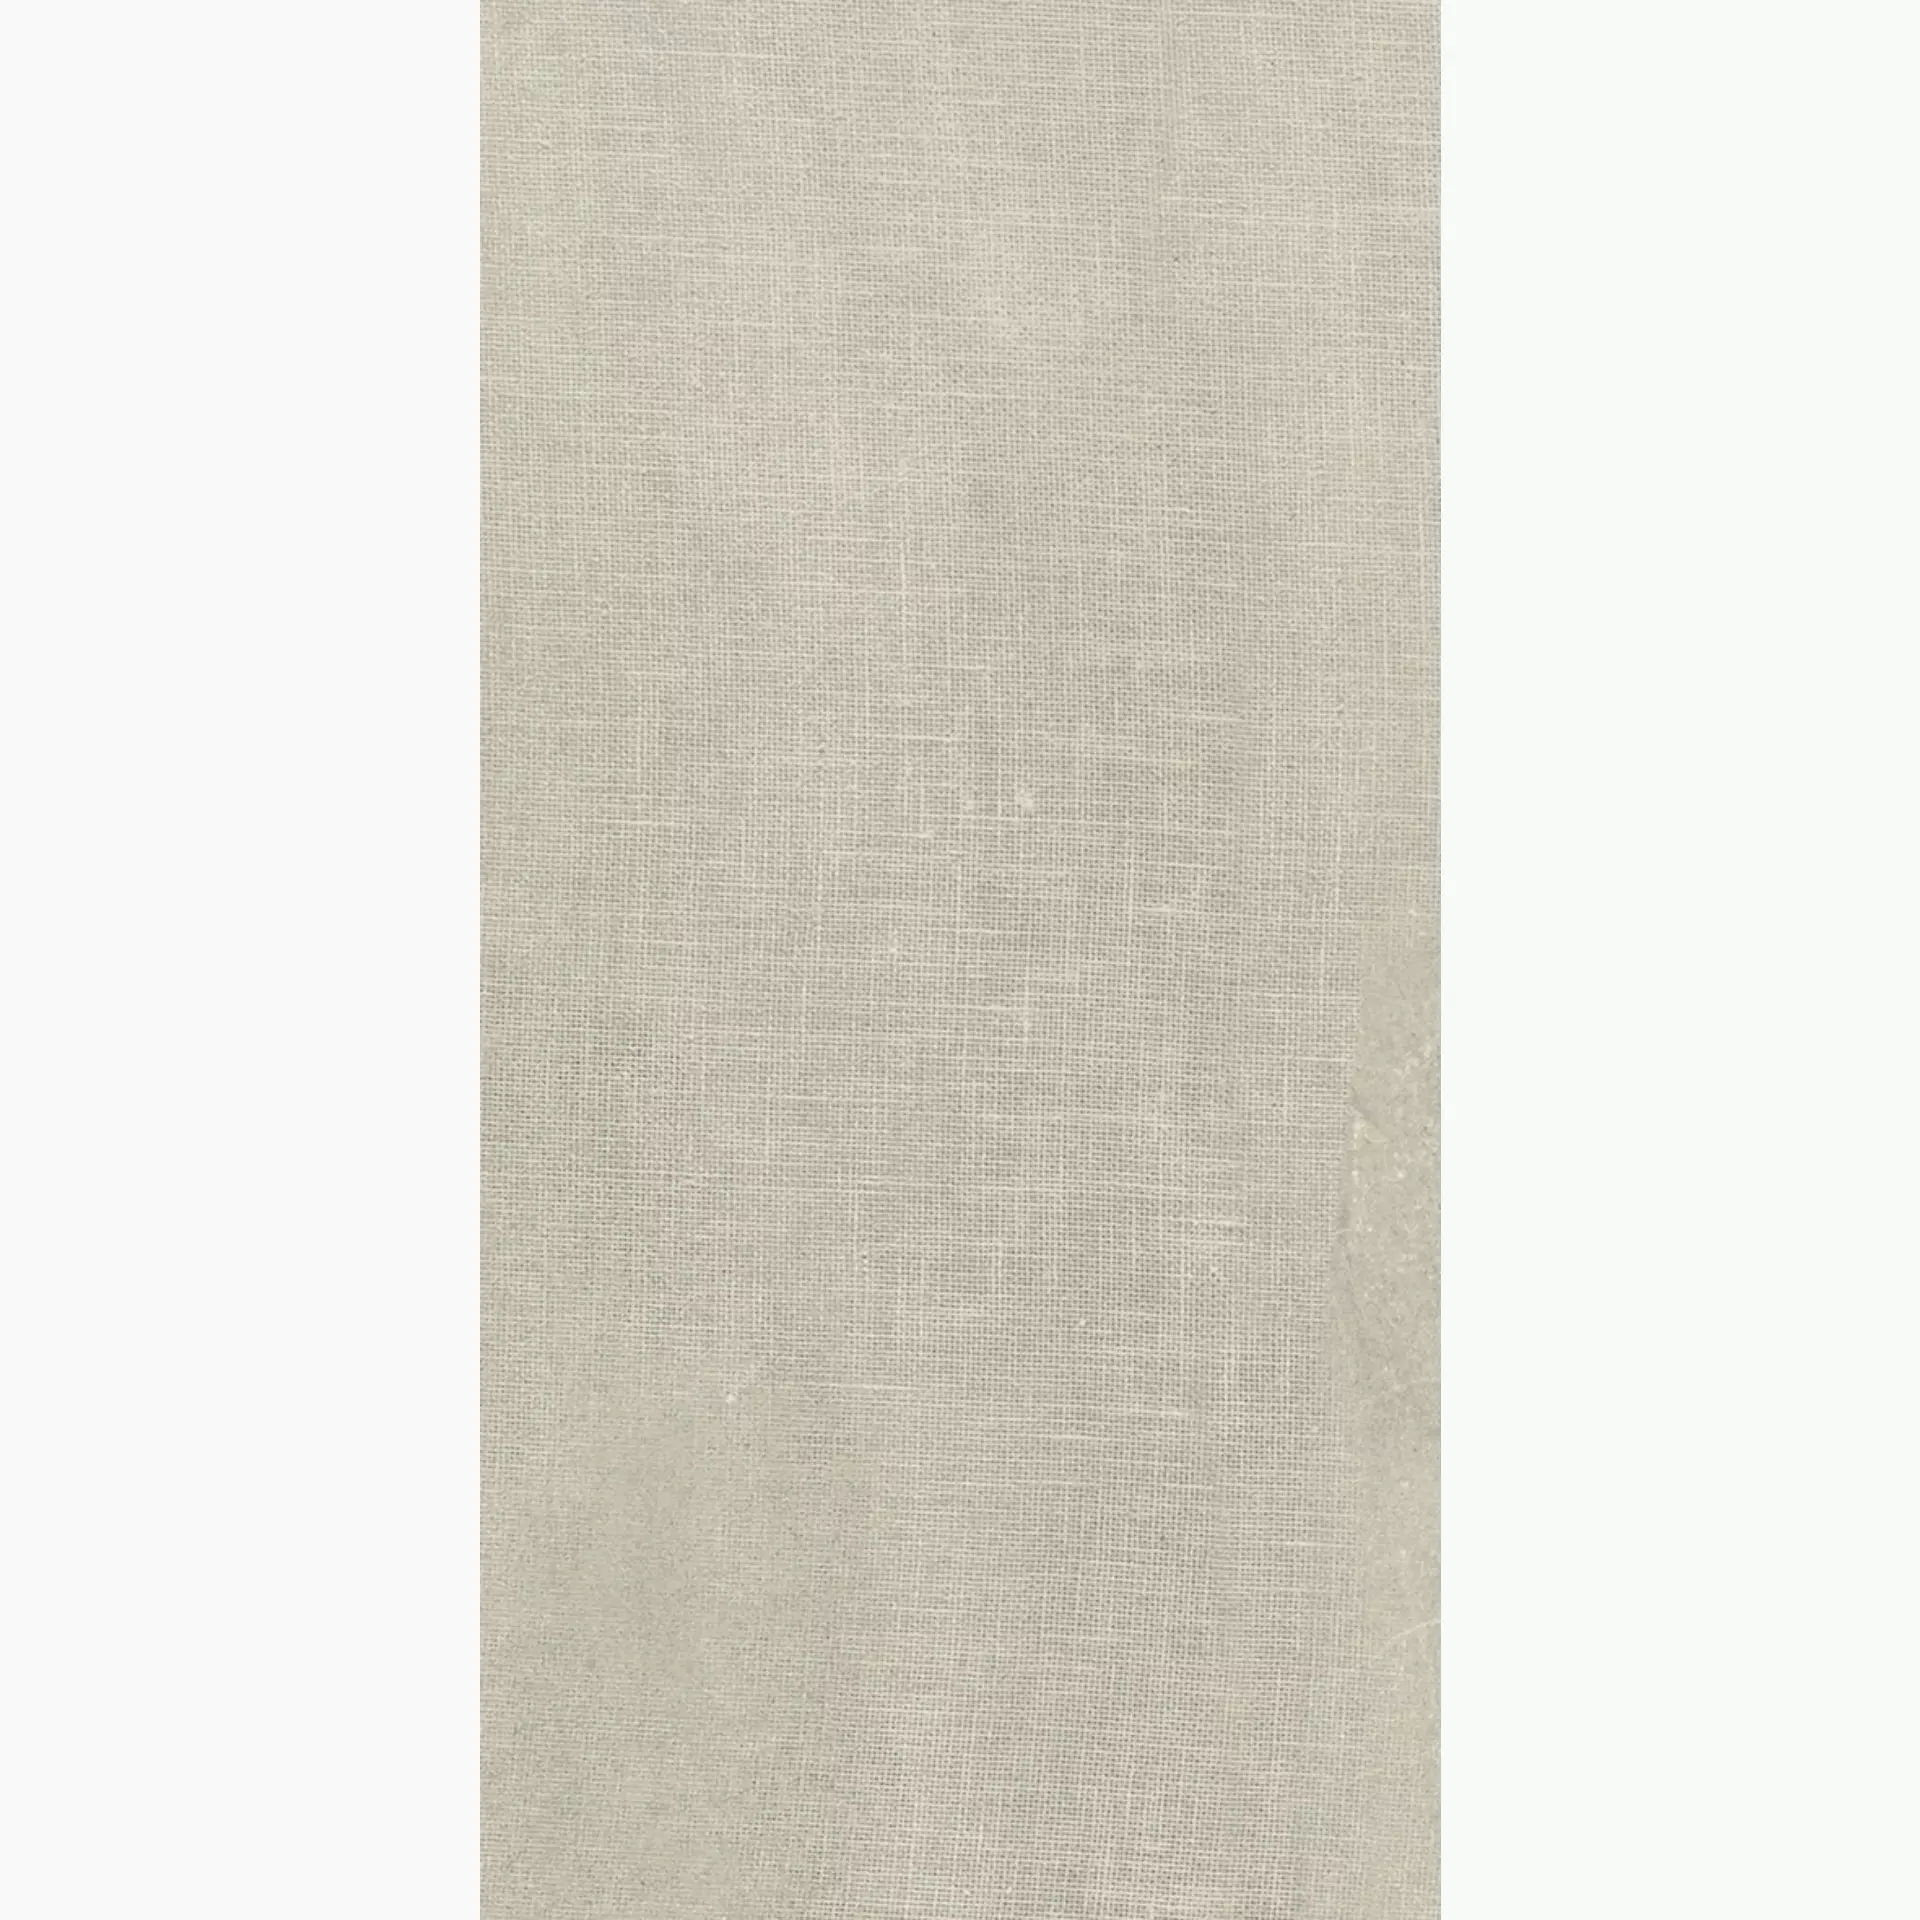 Provenza Gesso Taupe Linen Naturale E34K 30x60cm rectified 9,5mm